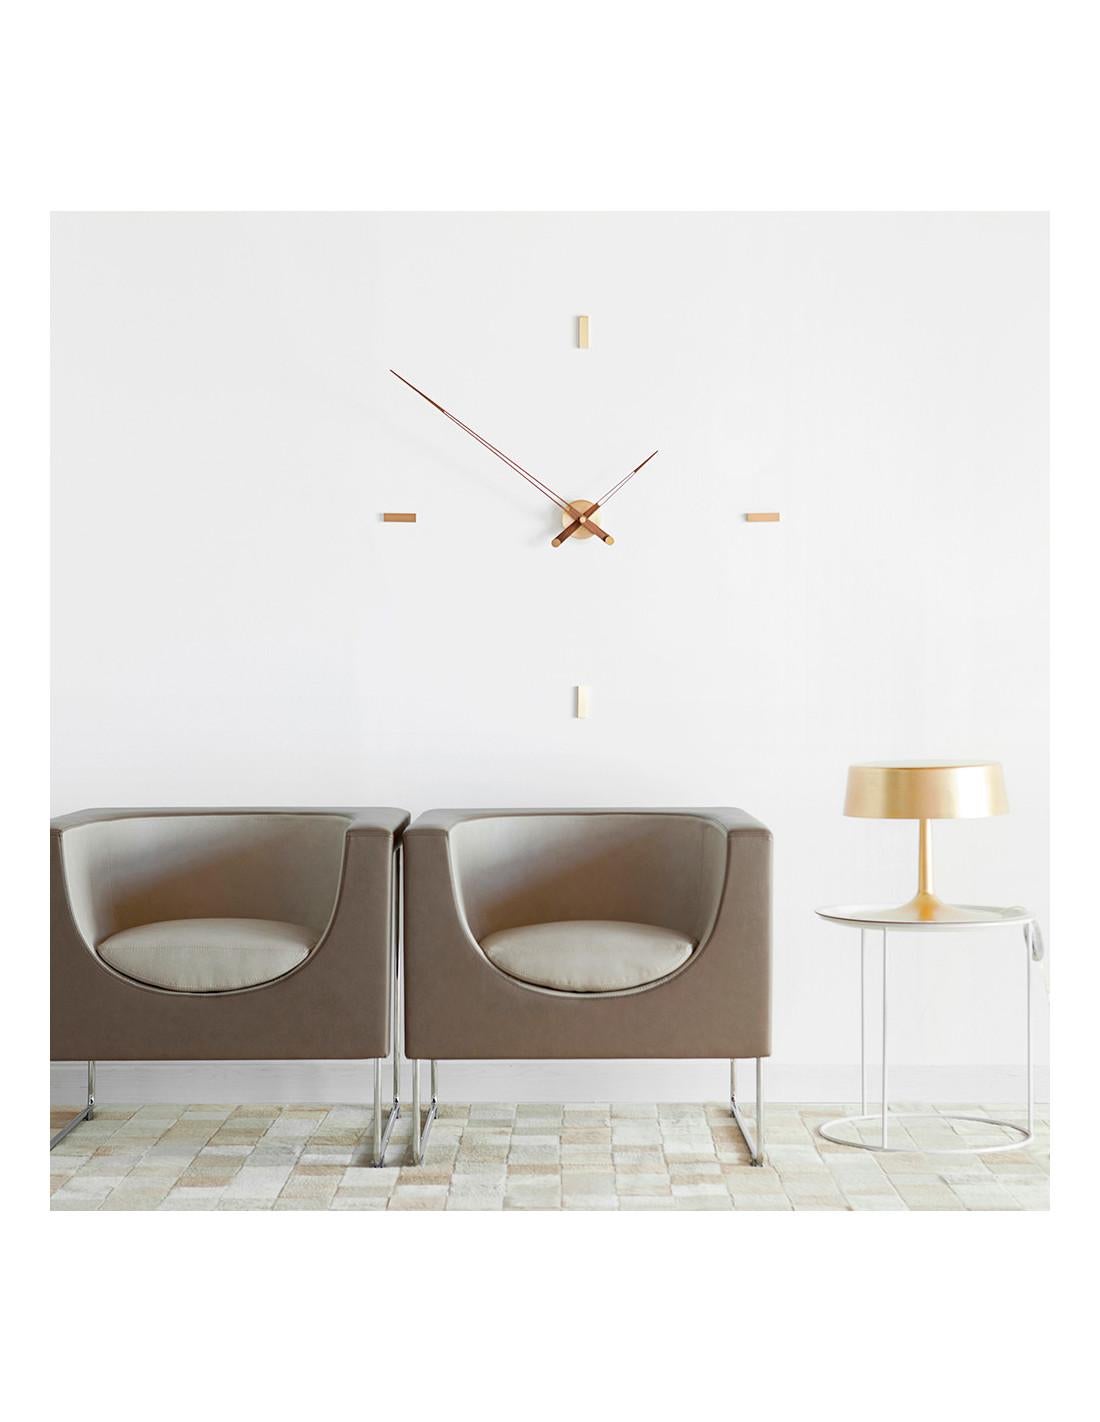 Tacón 4 Gold N wall clock focuses exclusively on the essential details, which makes it stand out for its minimalist presence wherever you place it.
Tacón 4 Gold N wall clock : 4ts in polished brass, hands in walnut..
Each clock is a unique